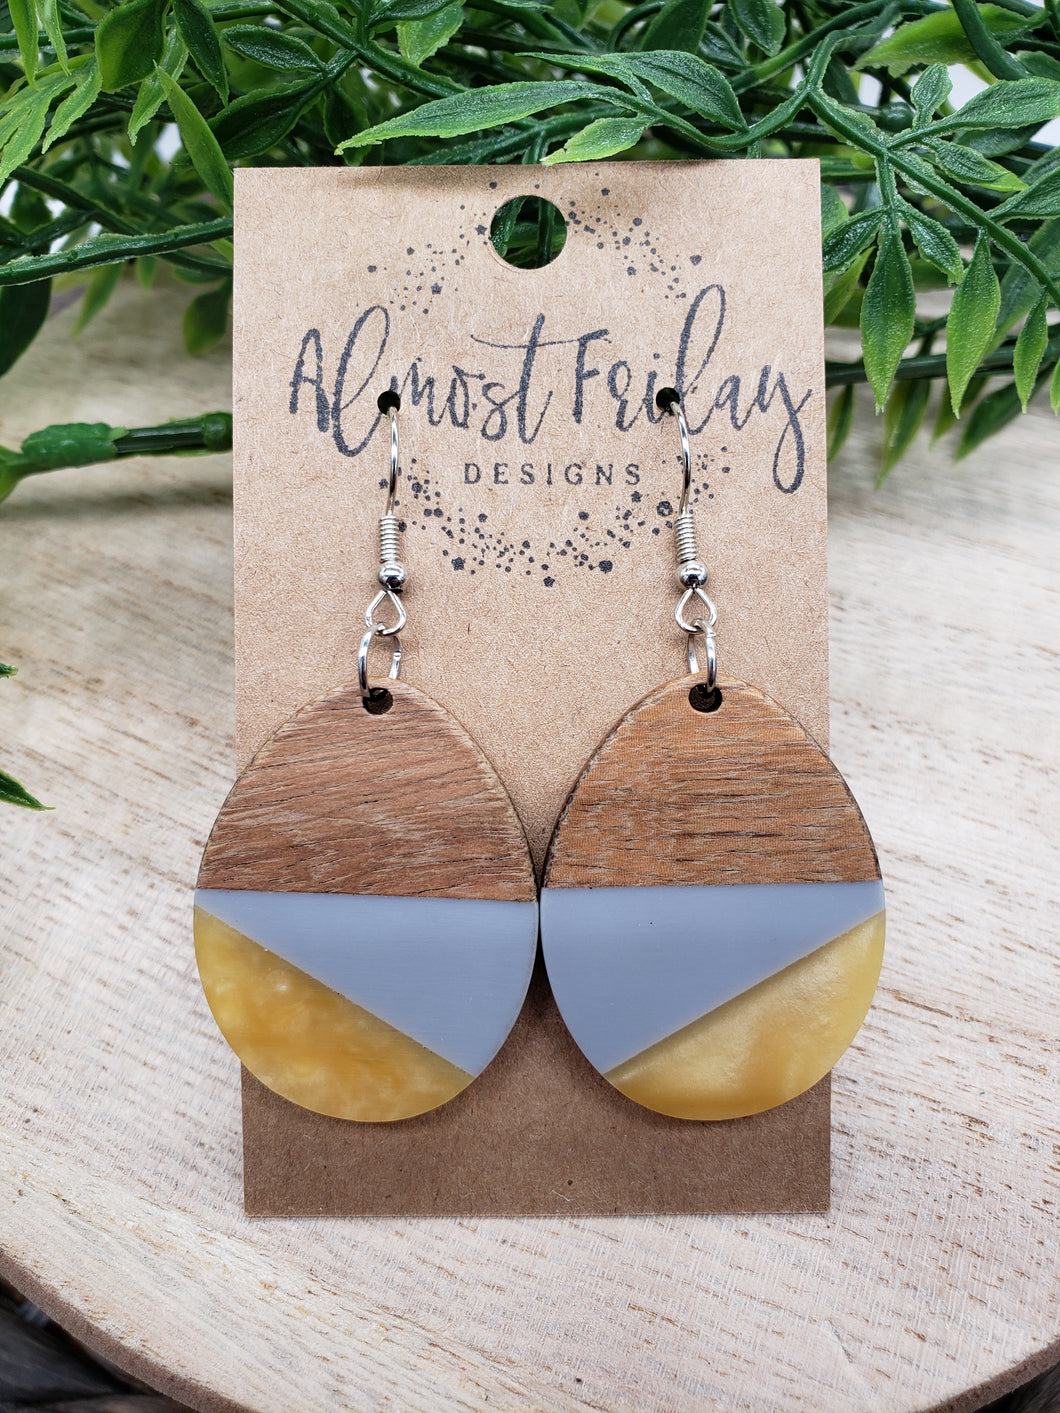 Wood and Resin Earrings - Oval - Yellow - Gray - Statement Earrings - Pantone's Colors of the Year